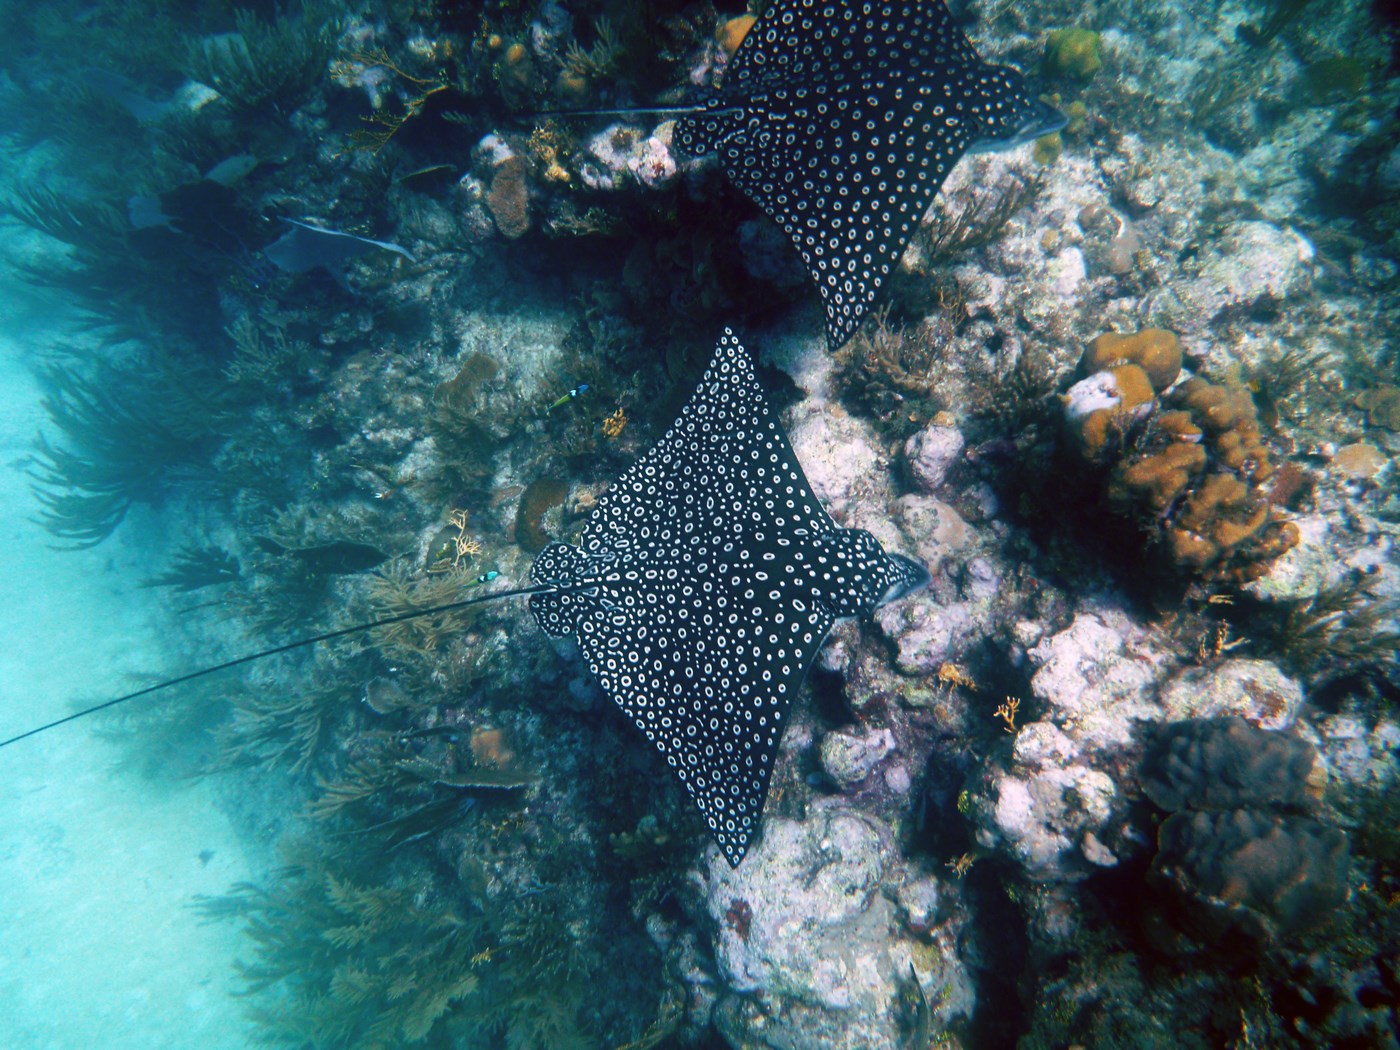 Spotted eagle rays